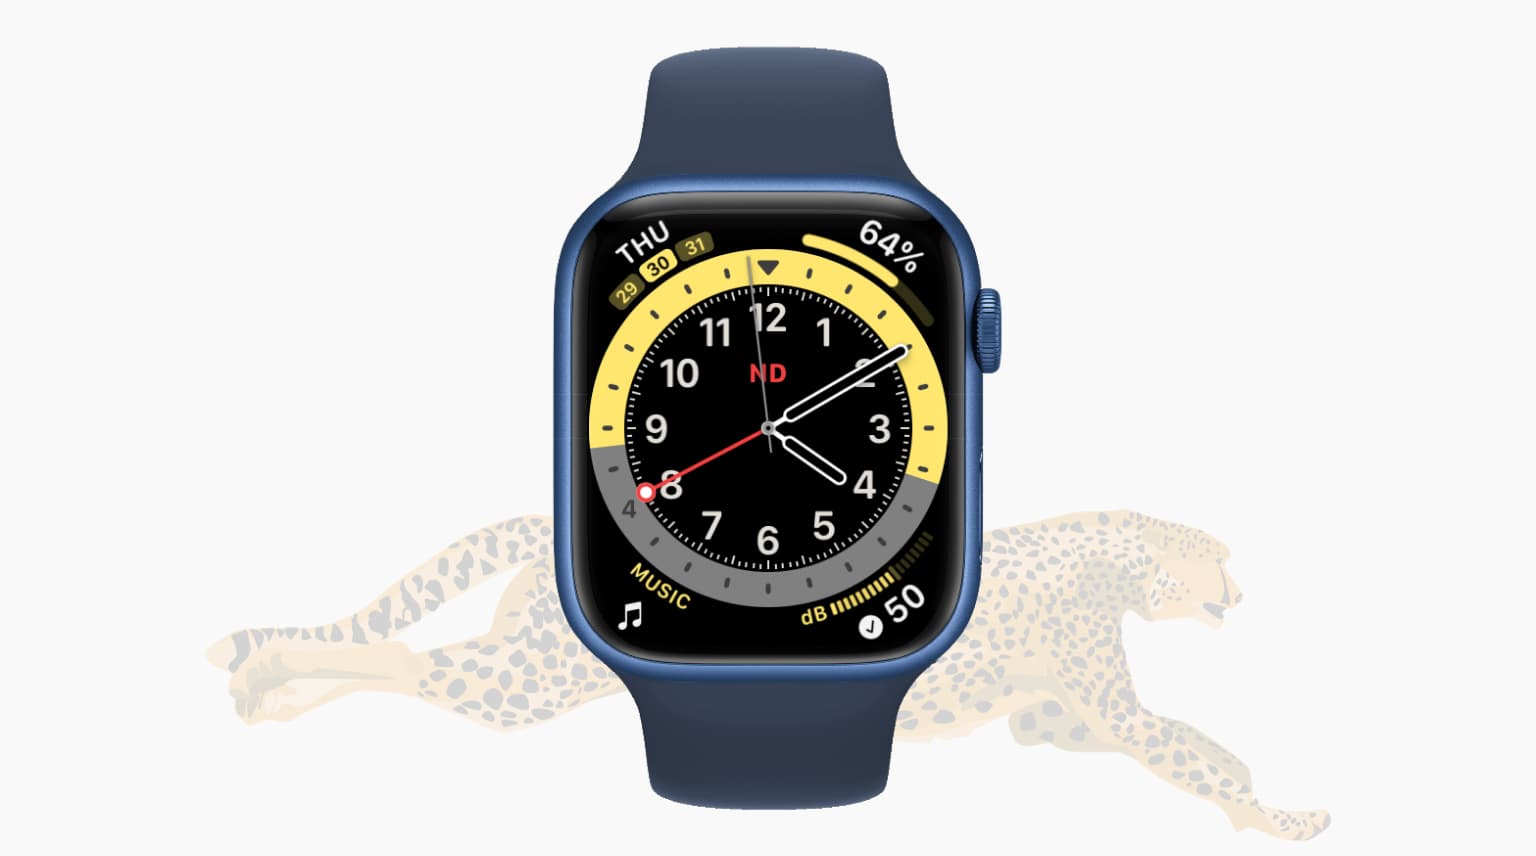 Apple Watch on a light background with faint Cheetah showing fast speed